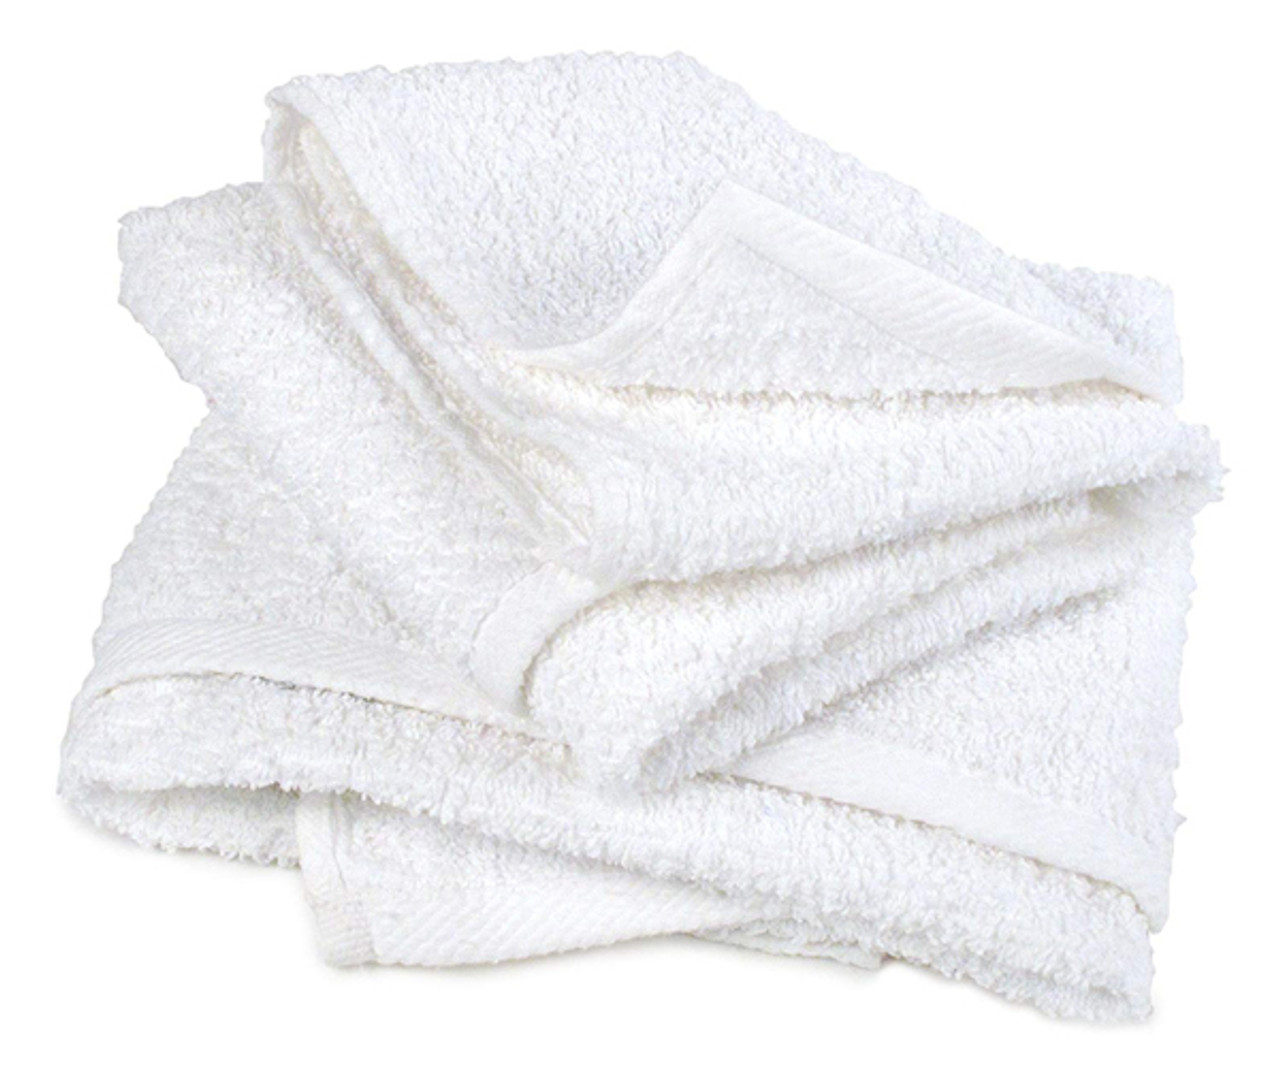 5 Lb White COTTON Terry Cloth Cleaning Towels / Rags / Wiping